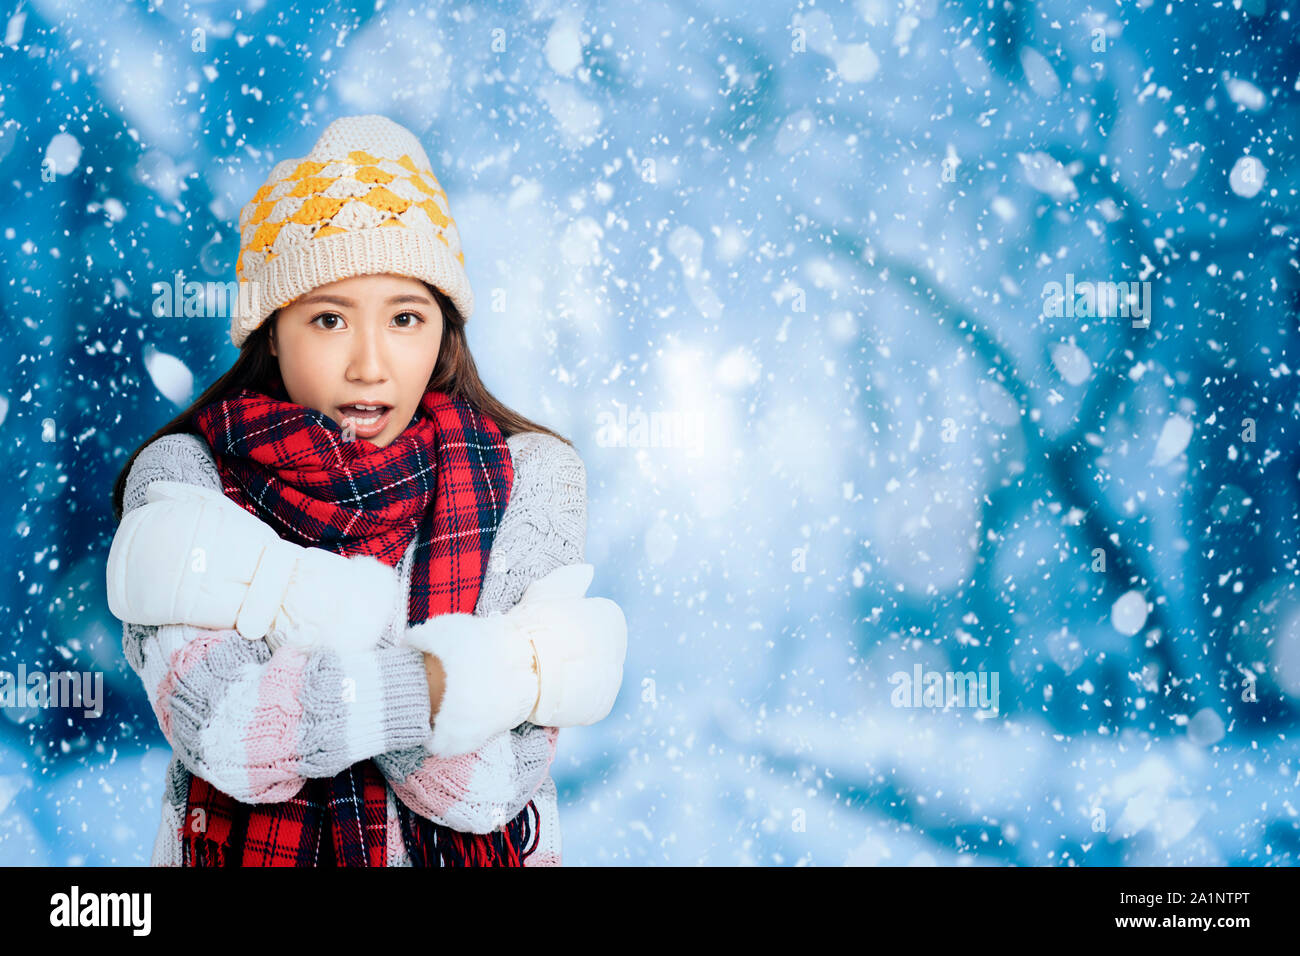 Young Beautiful Woman in winter clothes with snow background Stock Photo